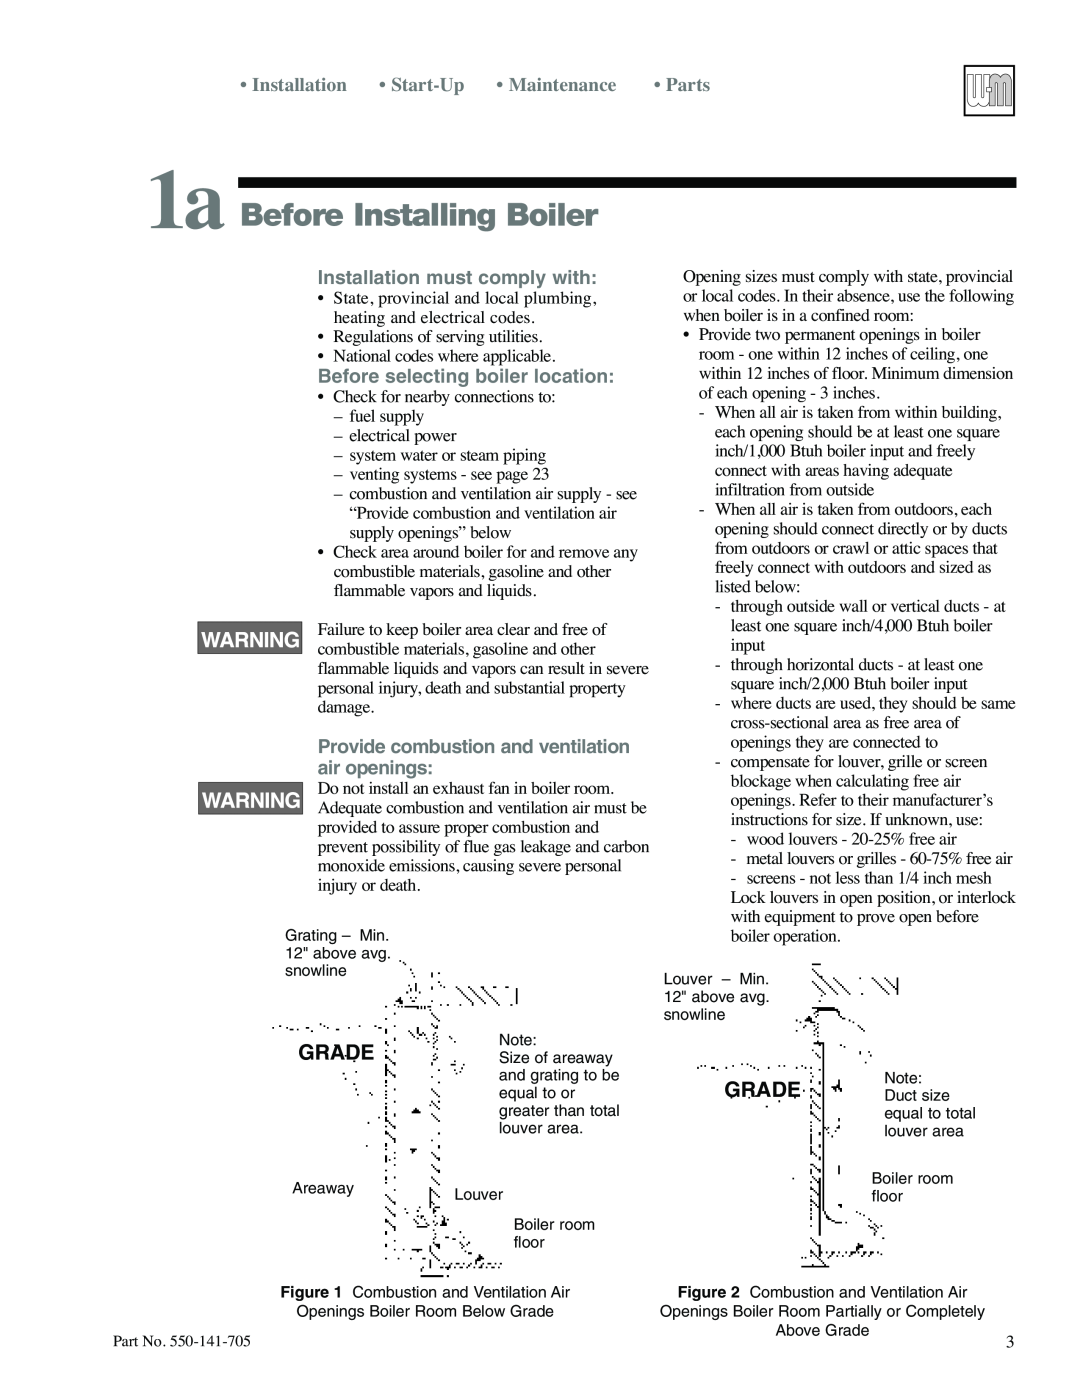 Weil-McLain 78 manual 1a Before Installing Boiler, Grade, Start-Up, Maintenance, Installation must comply with, Parts 